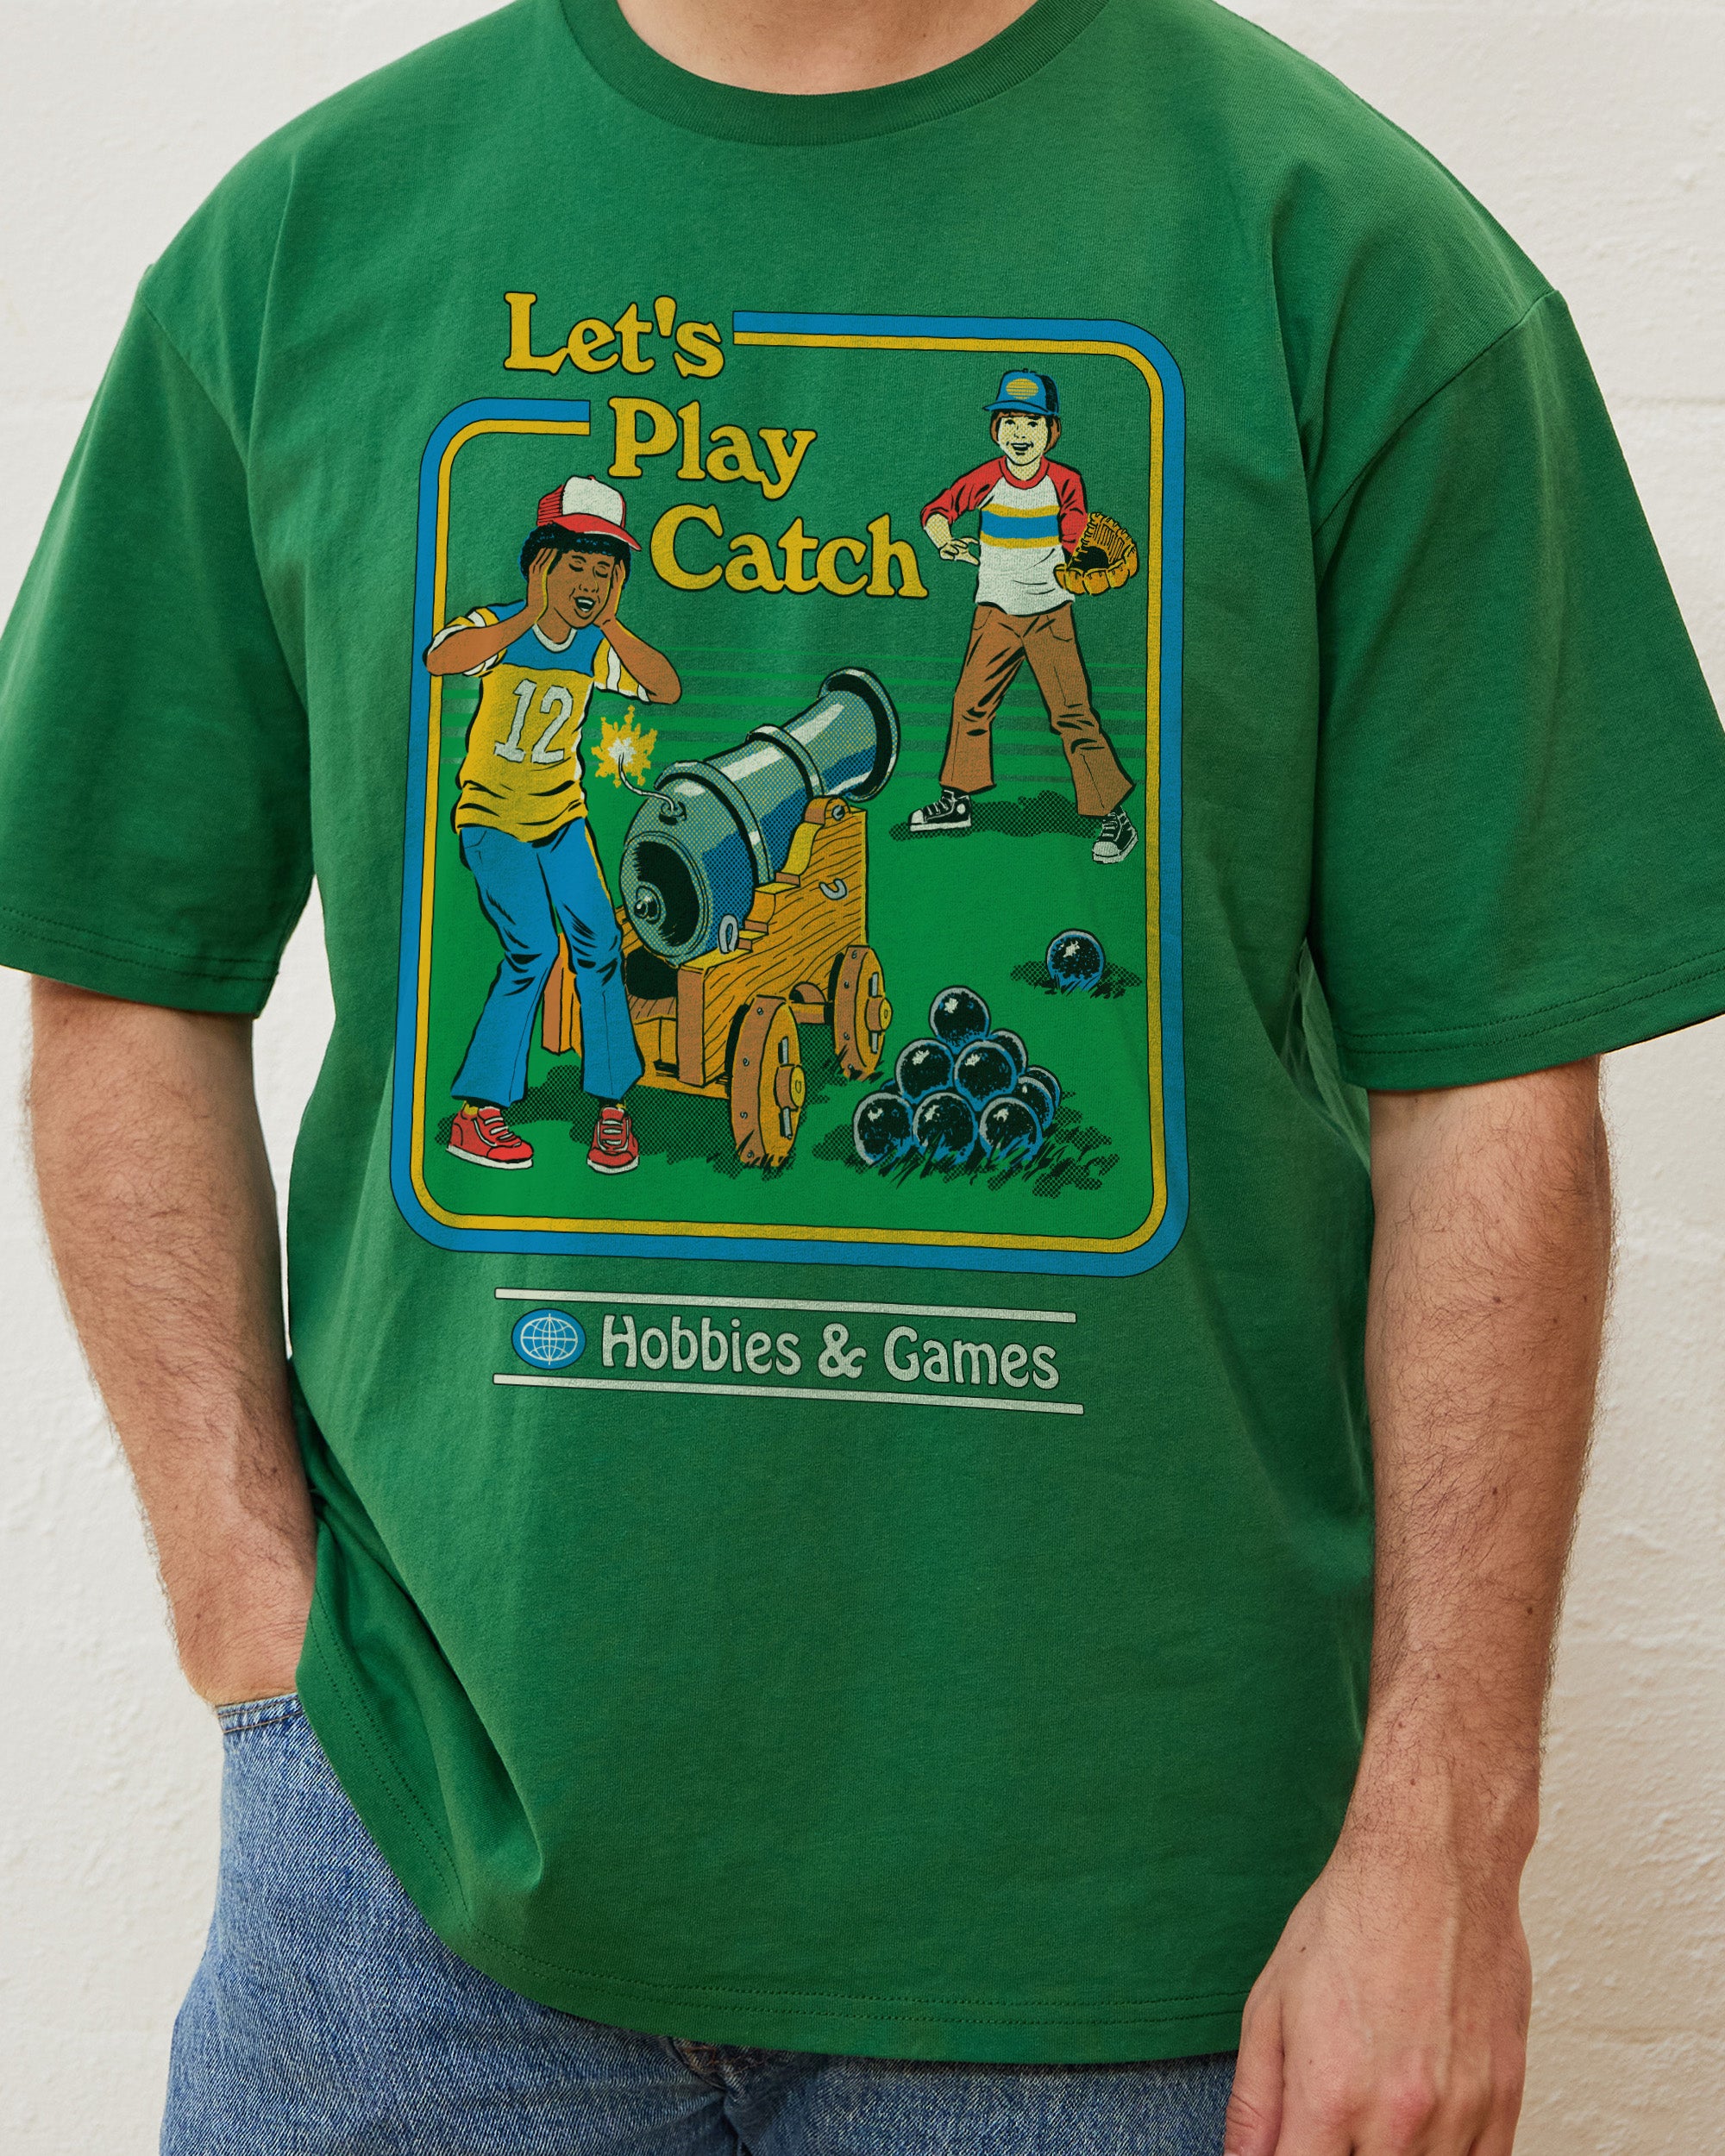 Let's Play Catch T-Shirt